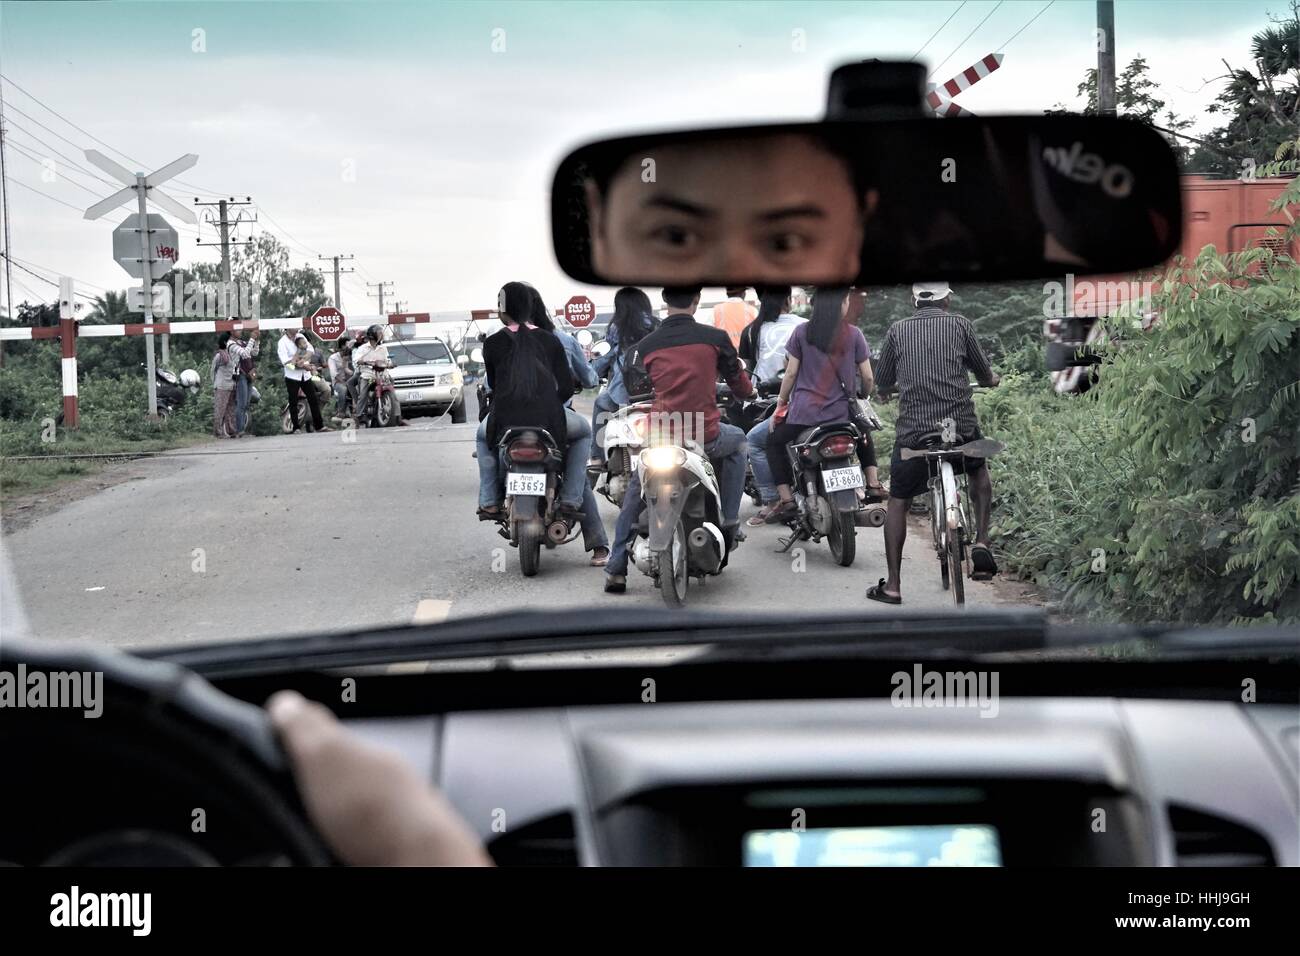 Waiting in the Car at the Level Crossing for the Train to Pass - Drivers Reflection (Eyes) in the Mirror - Cambodia Stock Photo